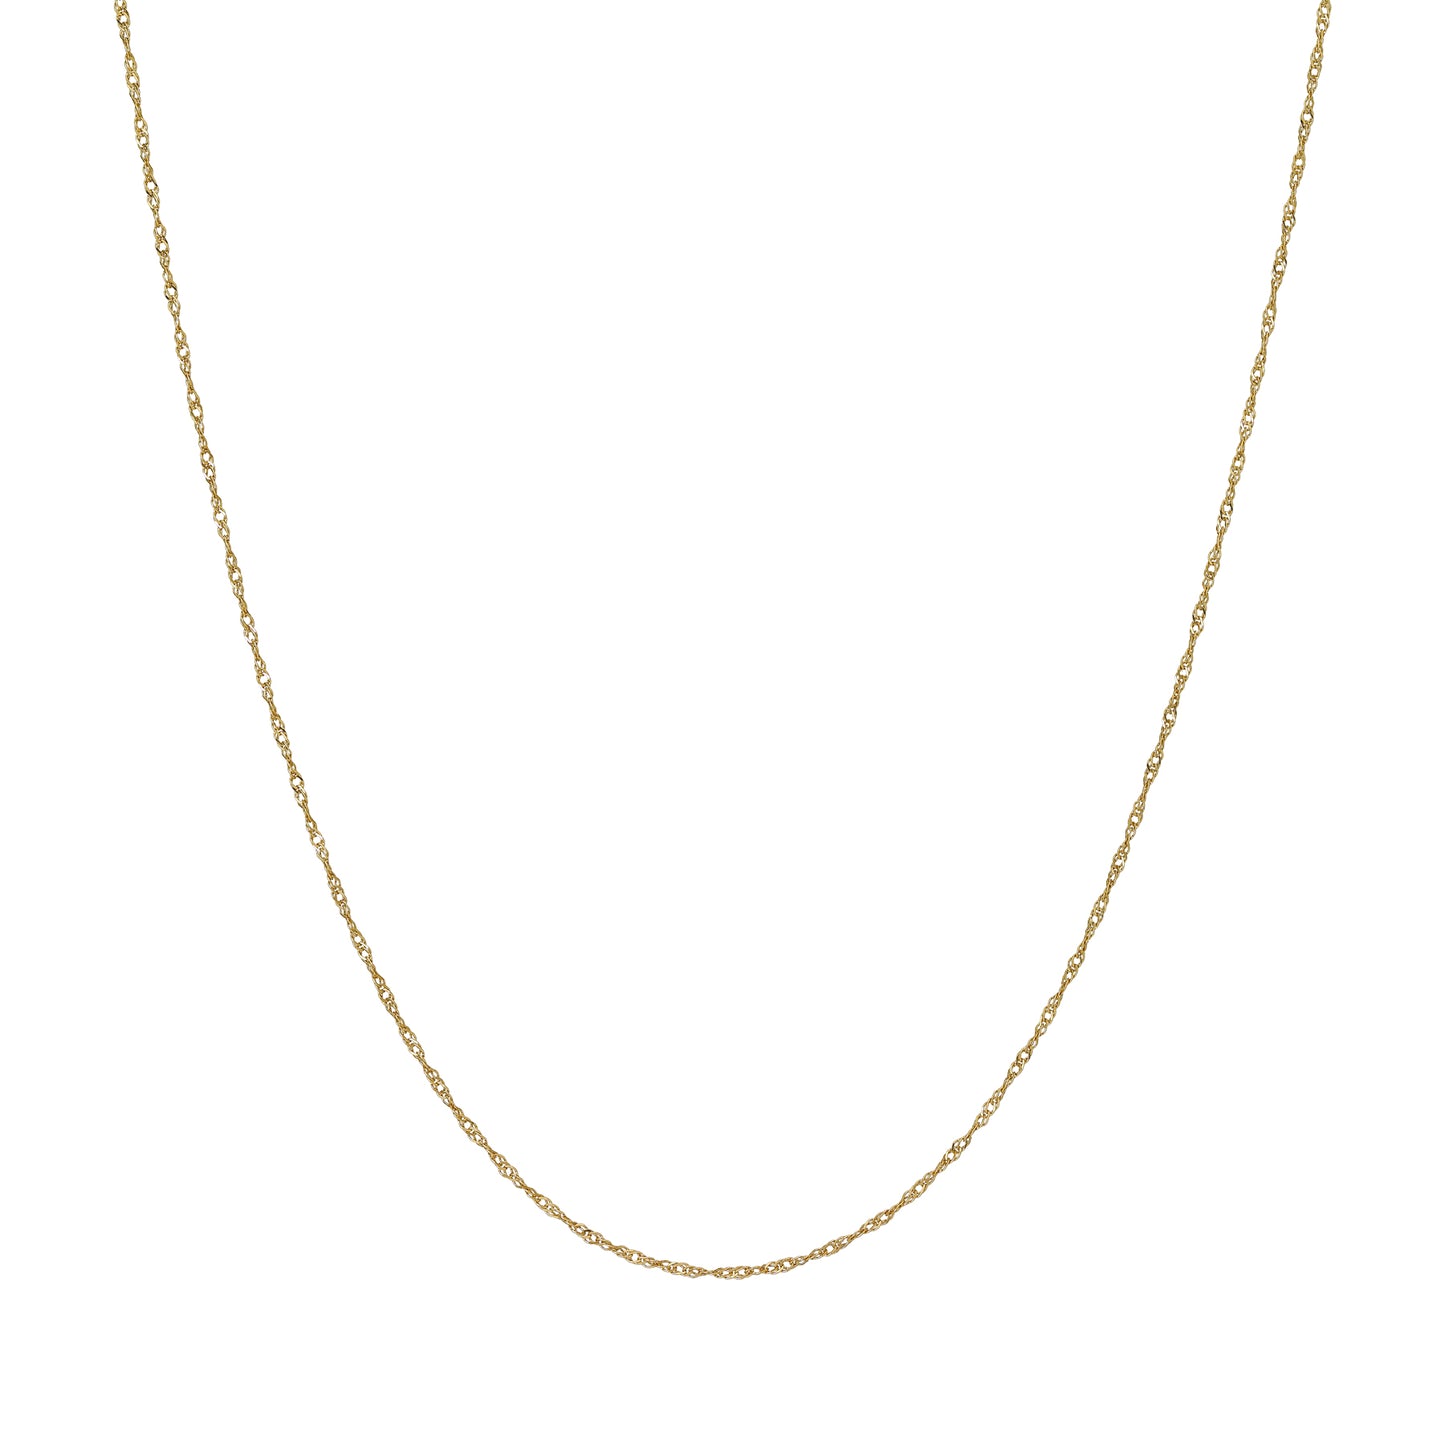 10K Screw Chain Necklace 50cm (Yellow Gold) - Product Image